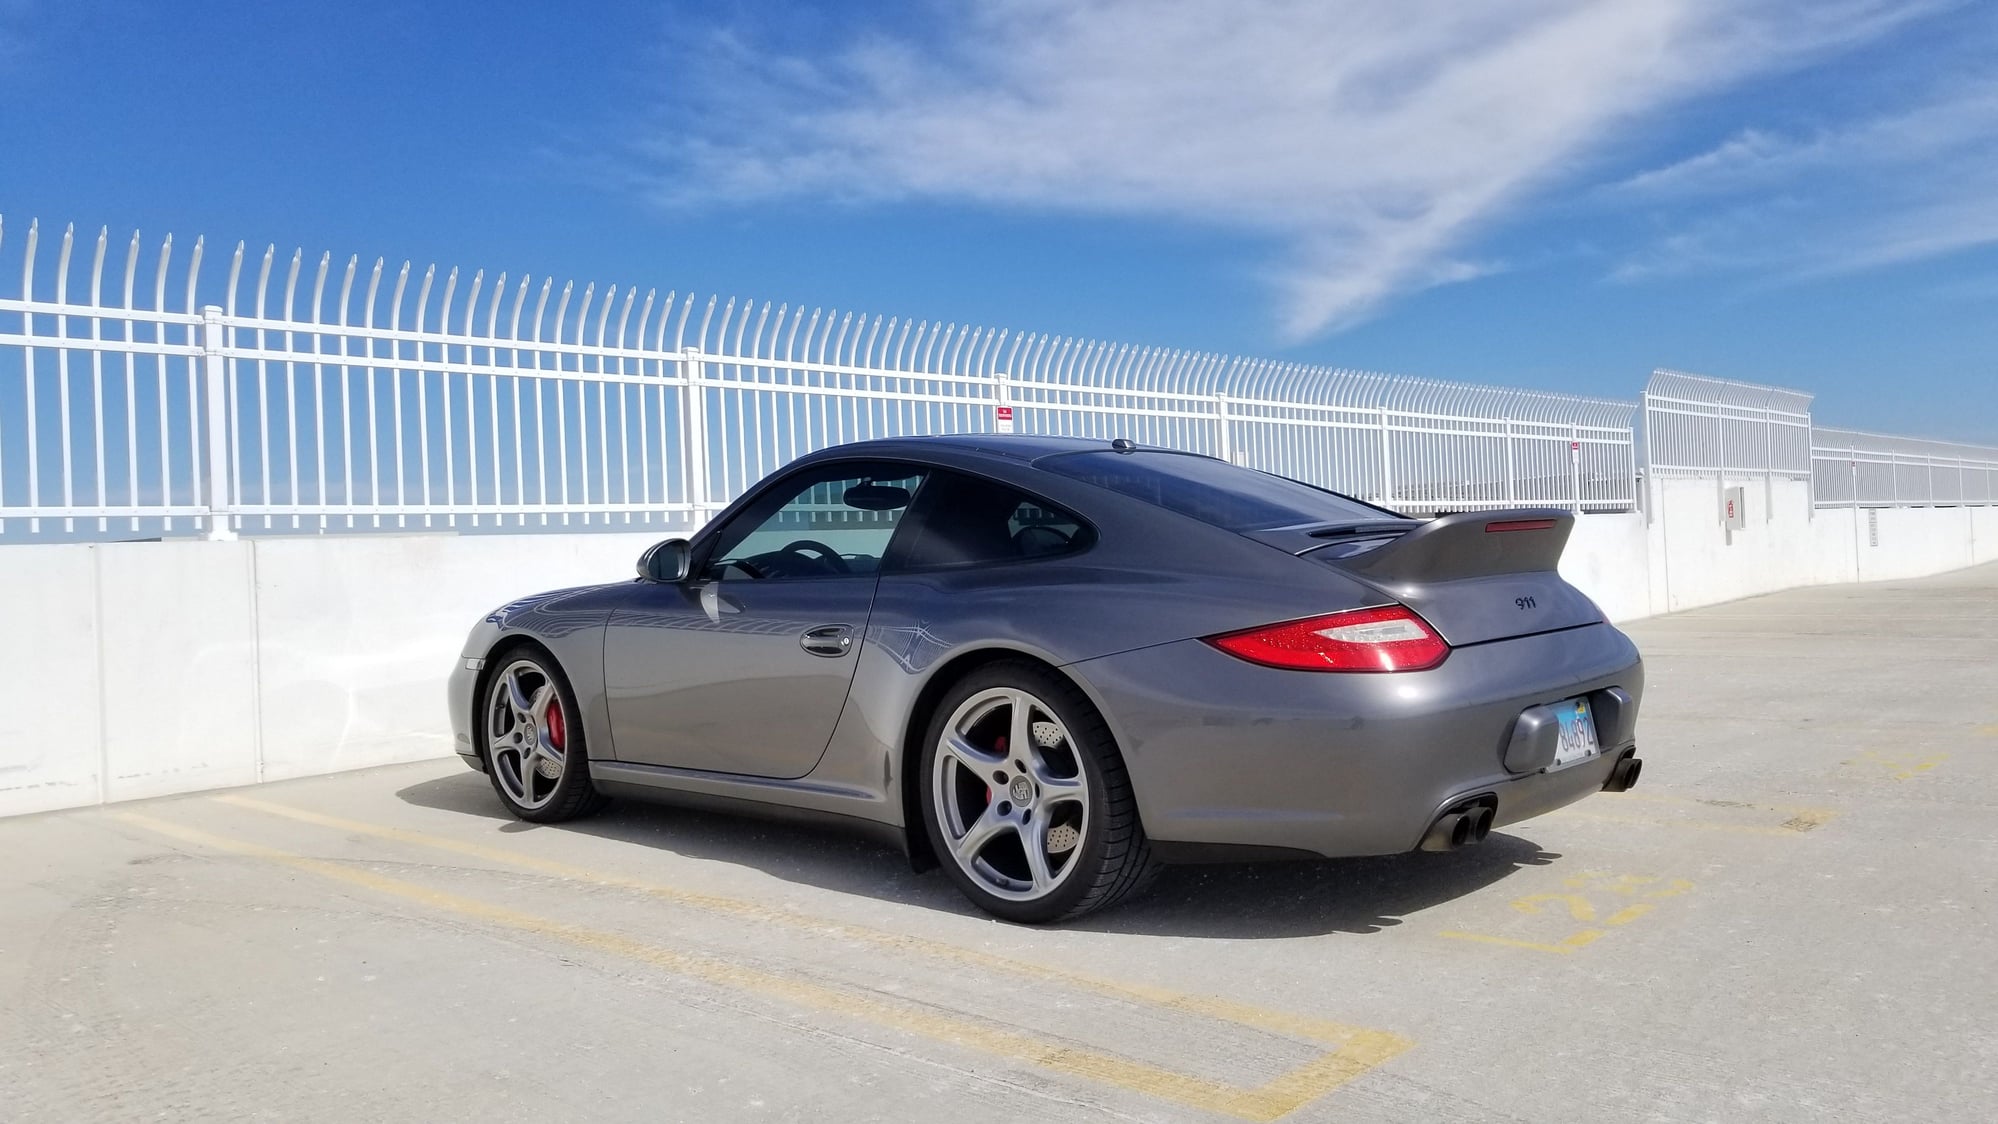 2009 Porsche 911 - 2009 Porsche 911 4S PDK with failing motor - Used - VIN to be provided - 76,000 Miles - 6 cyl - AWD - Automatic - Coupe - Gray - Lyons, IL 60534, United States